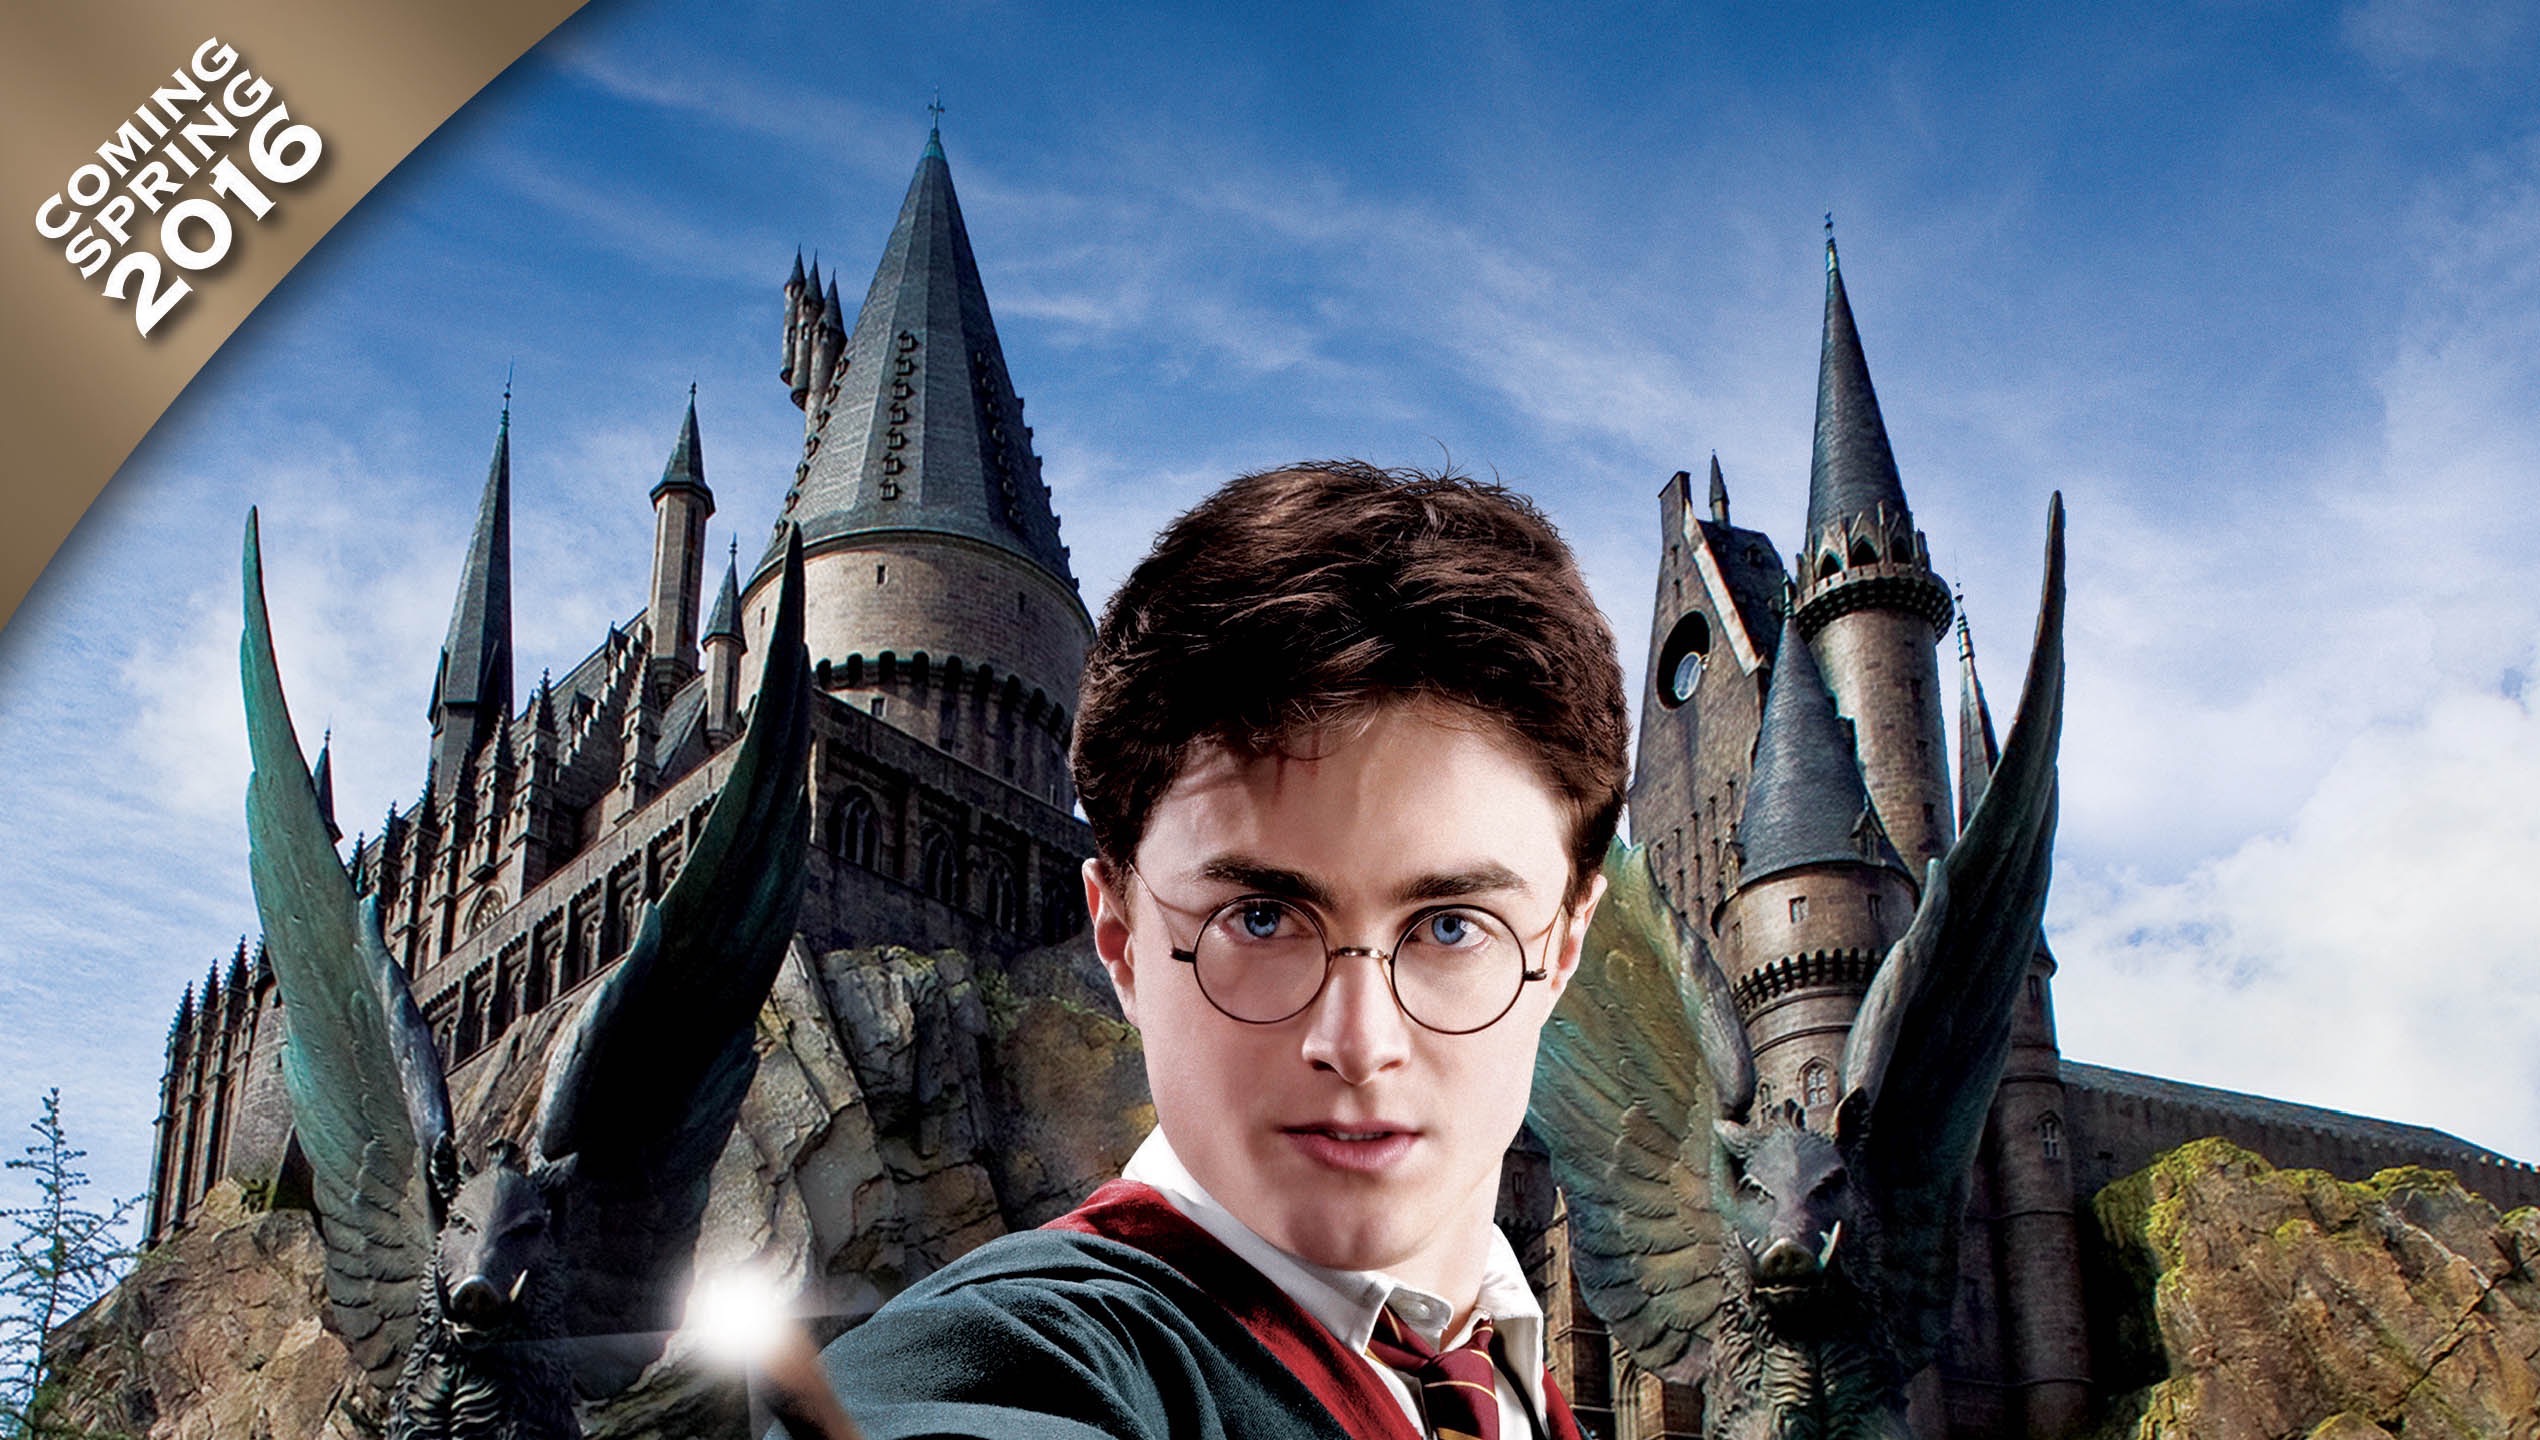 The Wizarding World of Harry Potter opening next spring at Universal  Studios Hollywood with 3D Forbidden Journey ride - Attractions Magazine